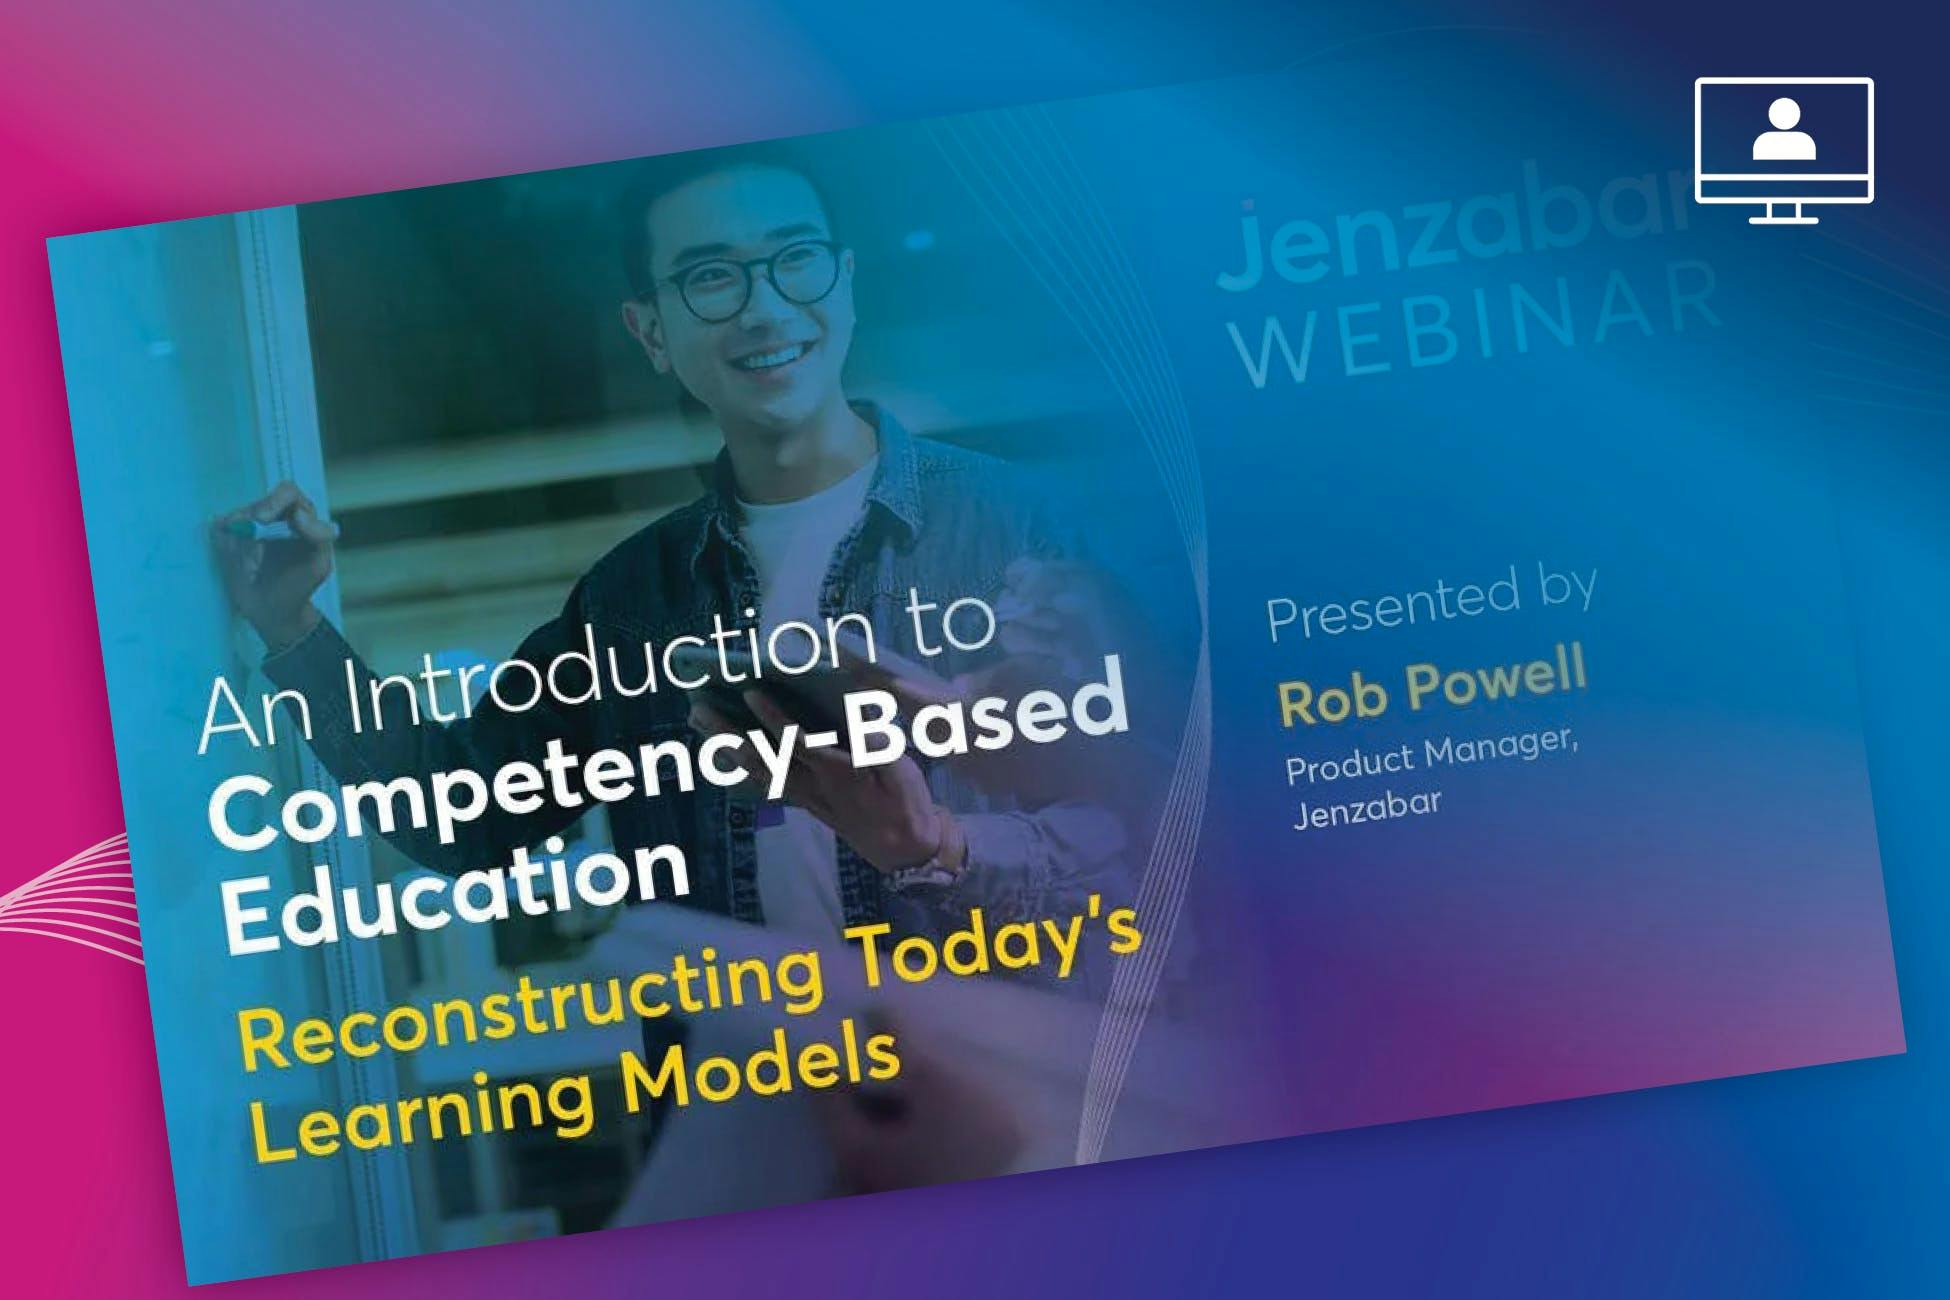 Webinar: Competency-Based Education: Restructuring Today’s Learning Models